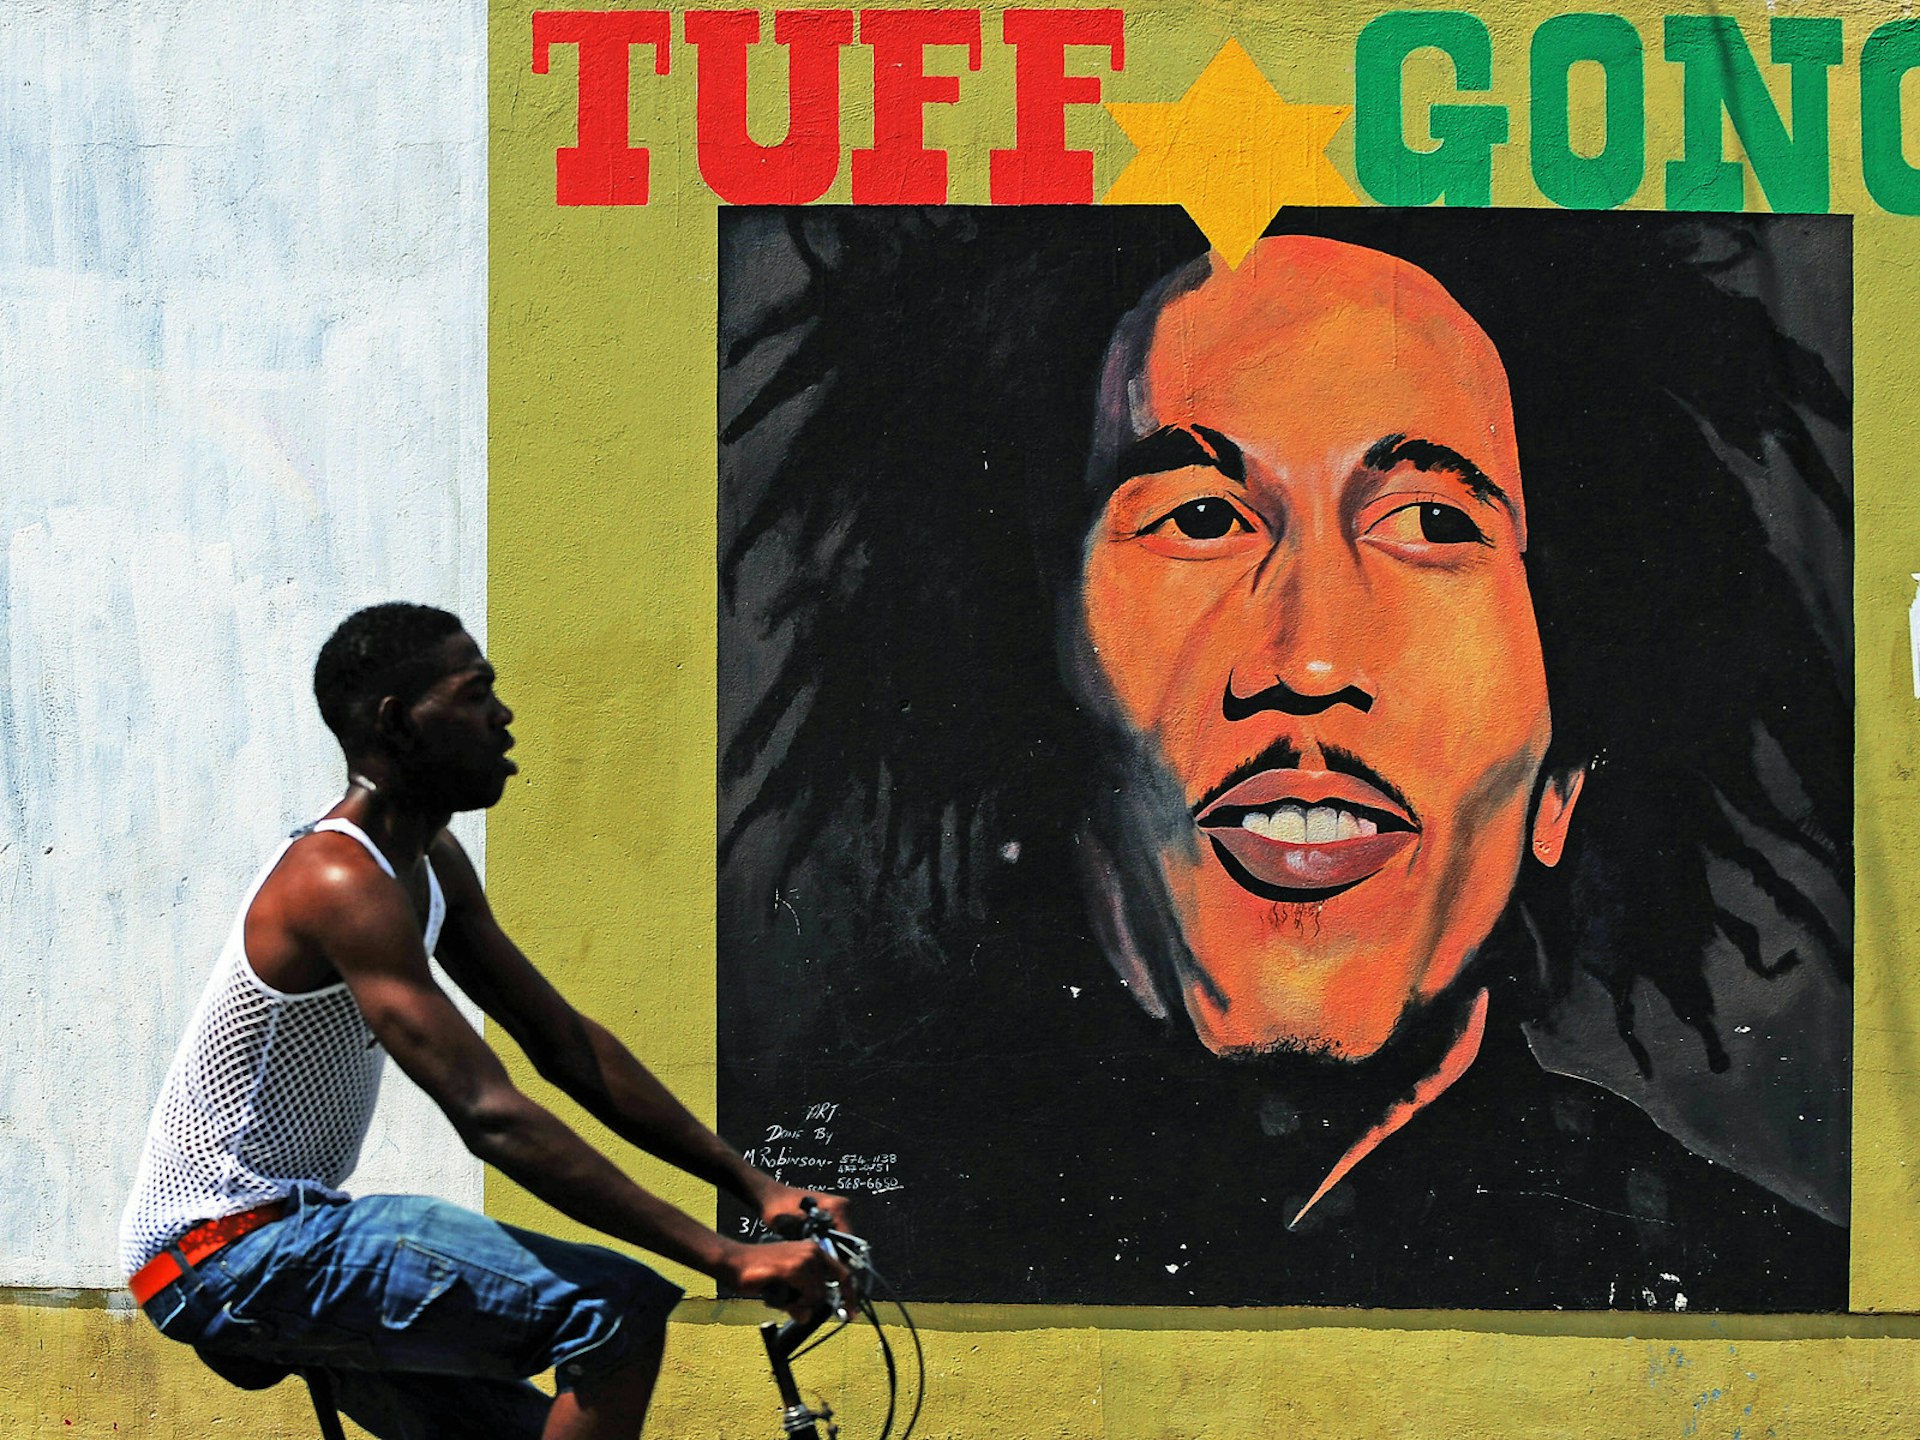 A man cycles past a large mural of Bob Marley on the streets on Kingston, Jamaica